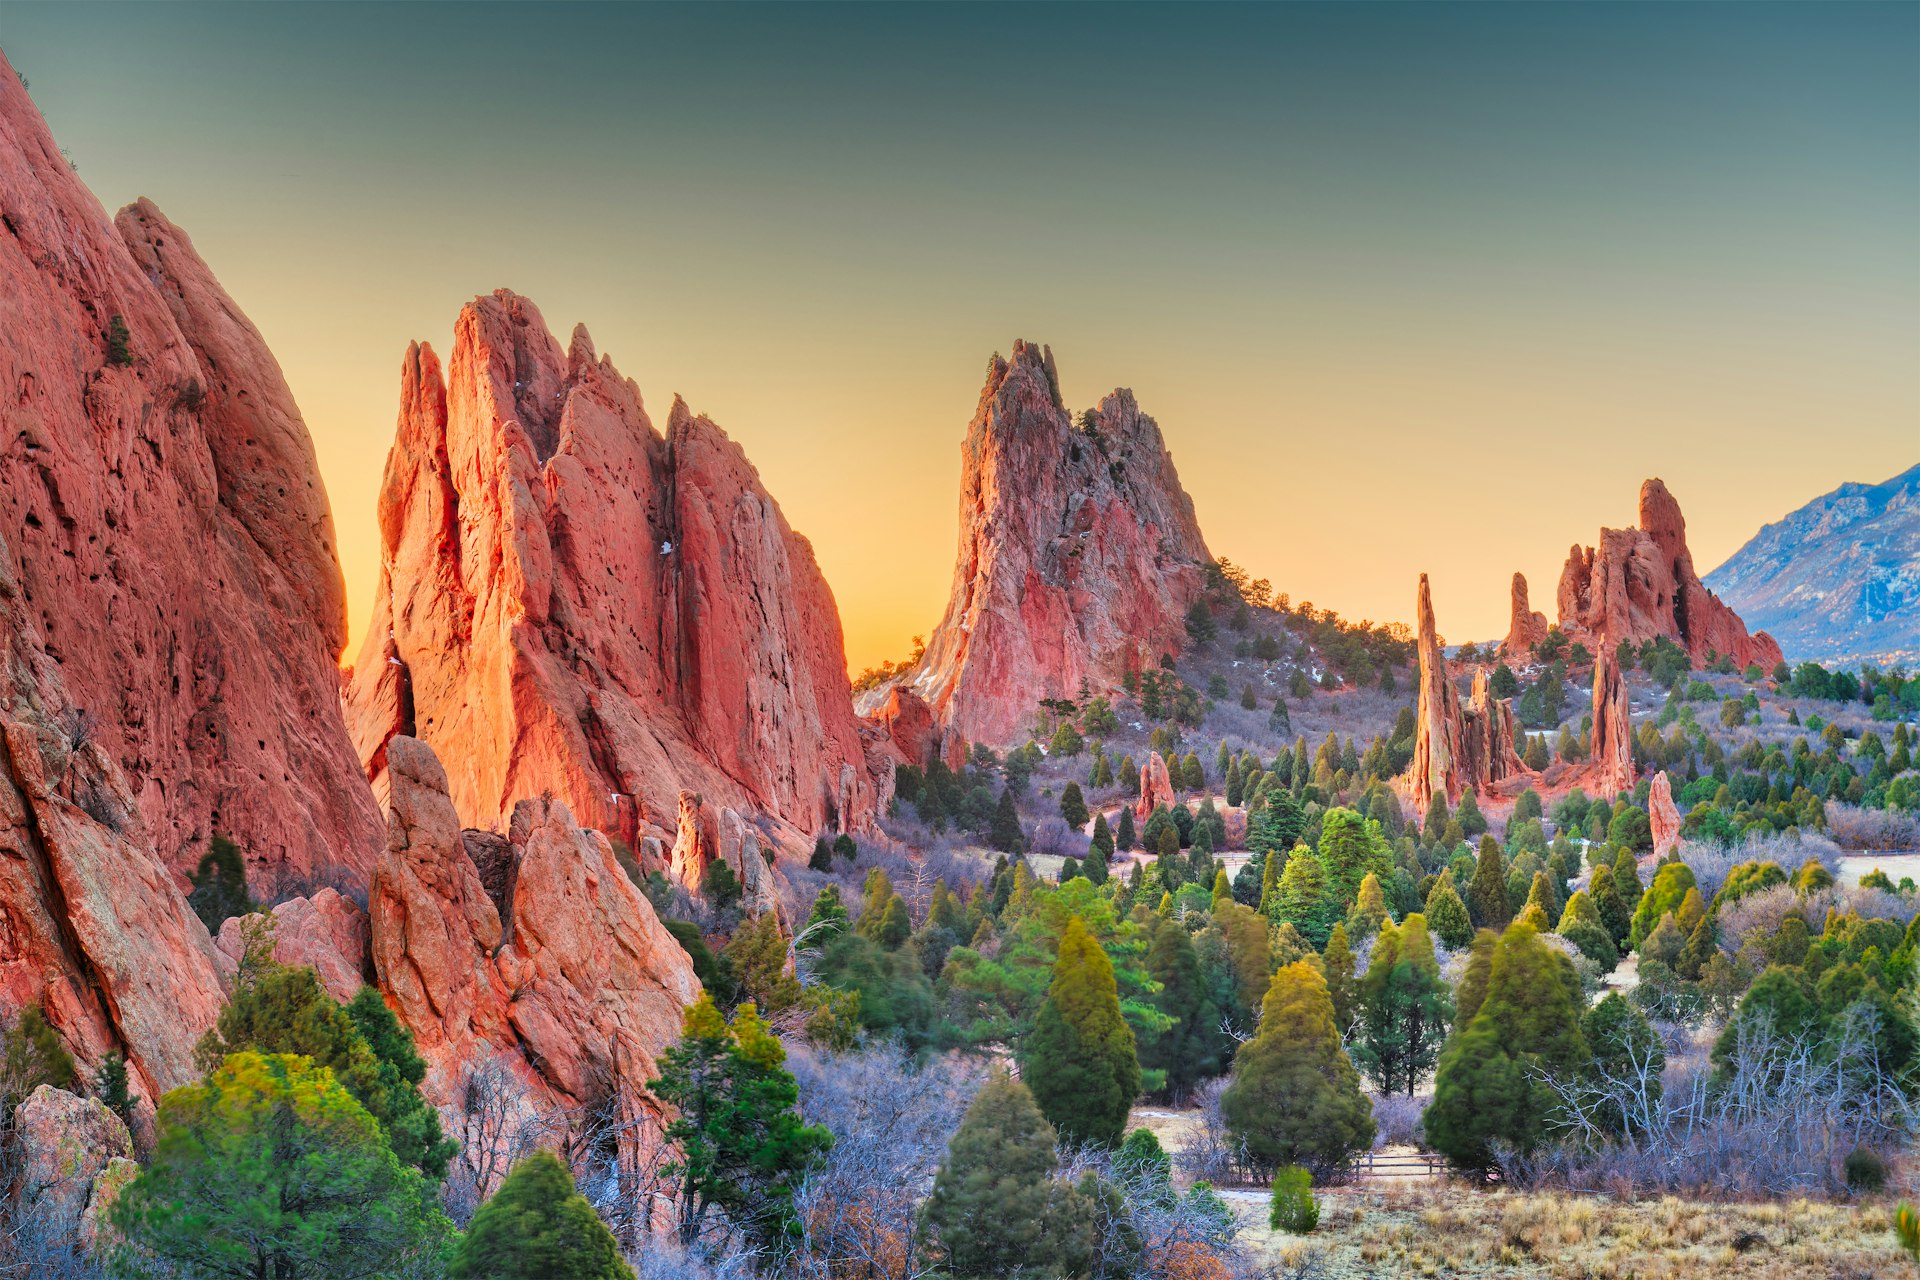 Sunset light on the red rock formations at Garden of the Gods, Colorado Springs, Colorado, USA